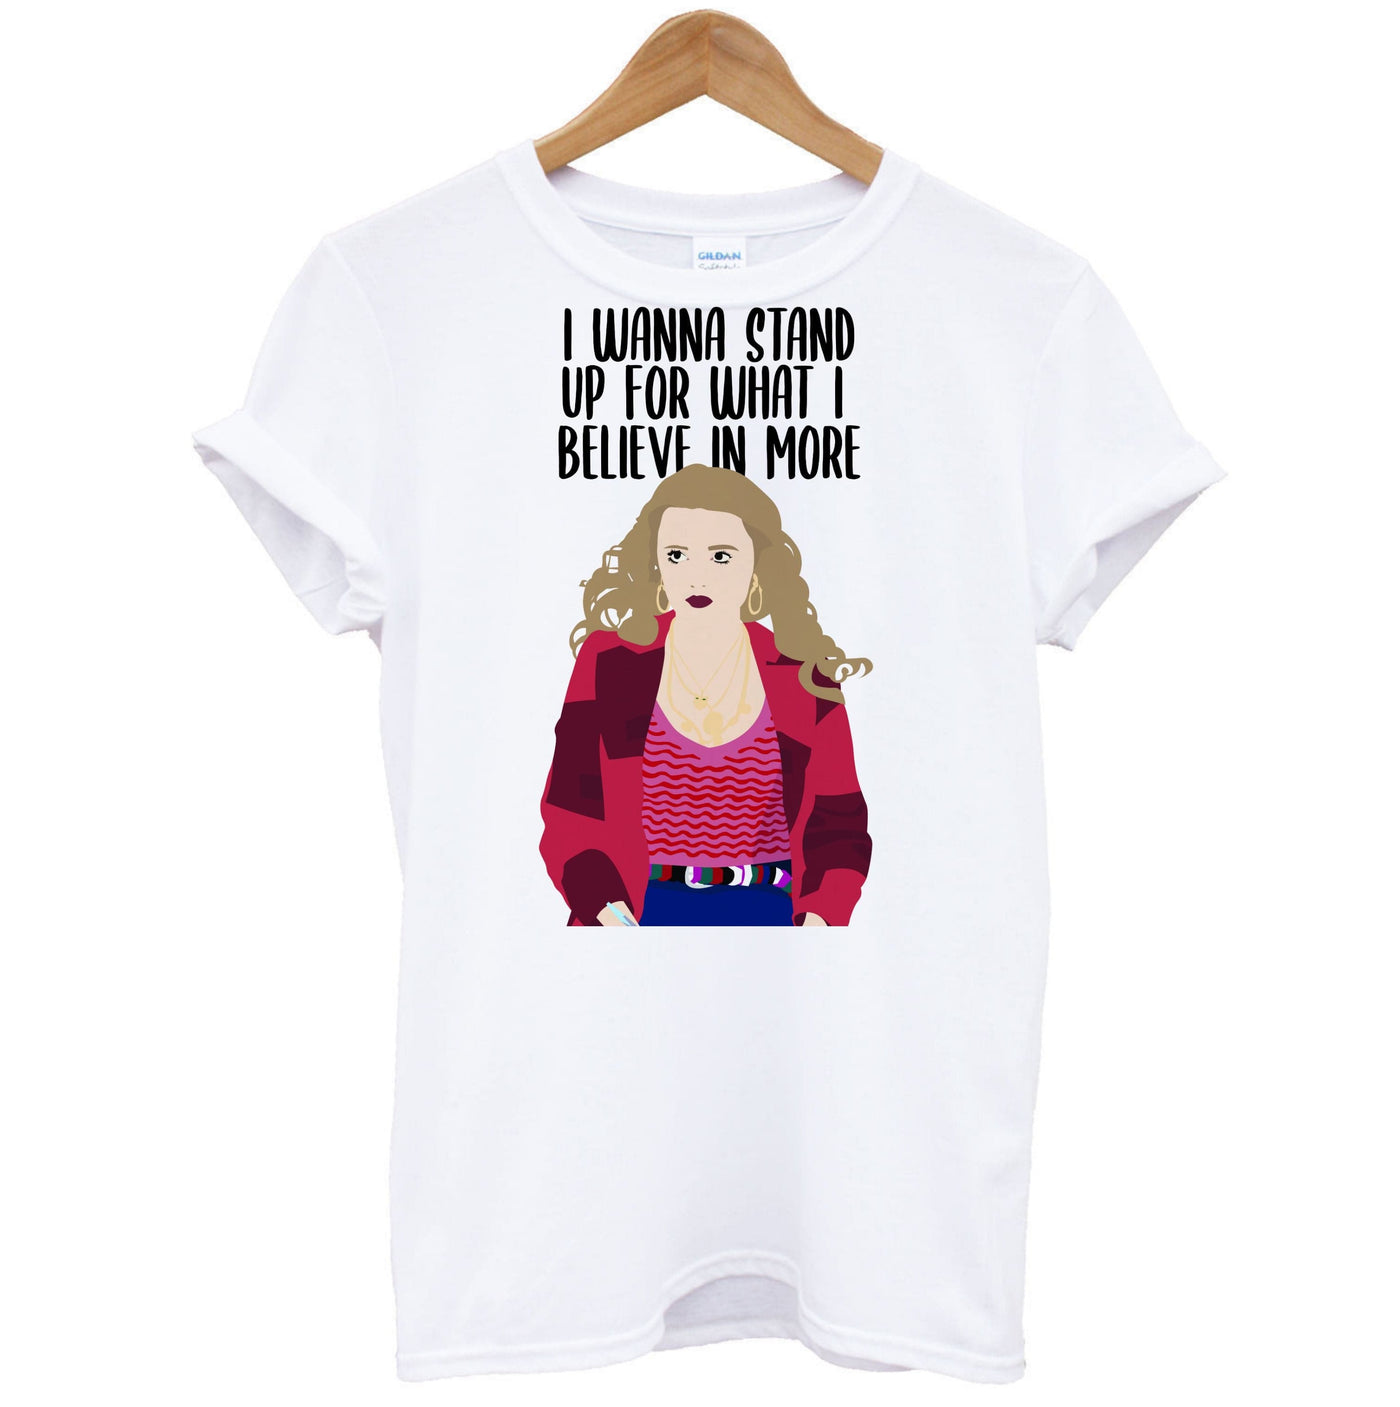 I Wanna Stand Up For What I Believe In More - Sex Education T-Shirt